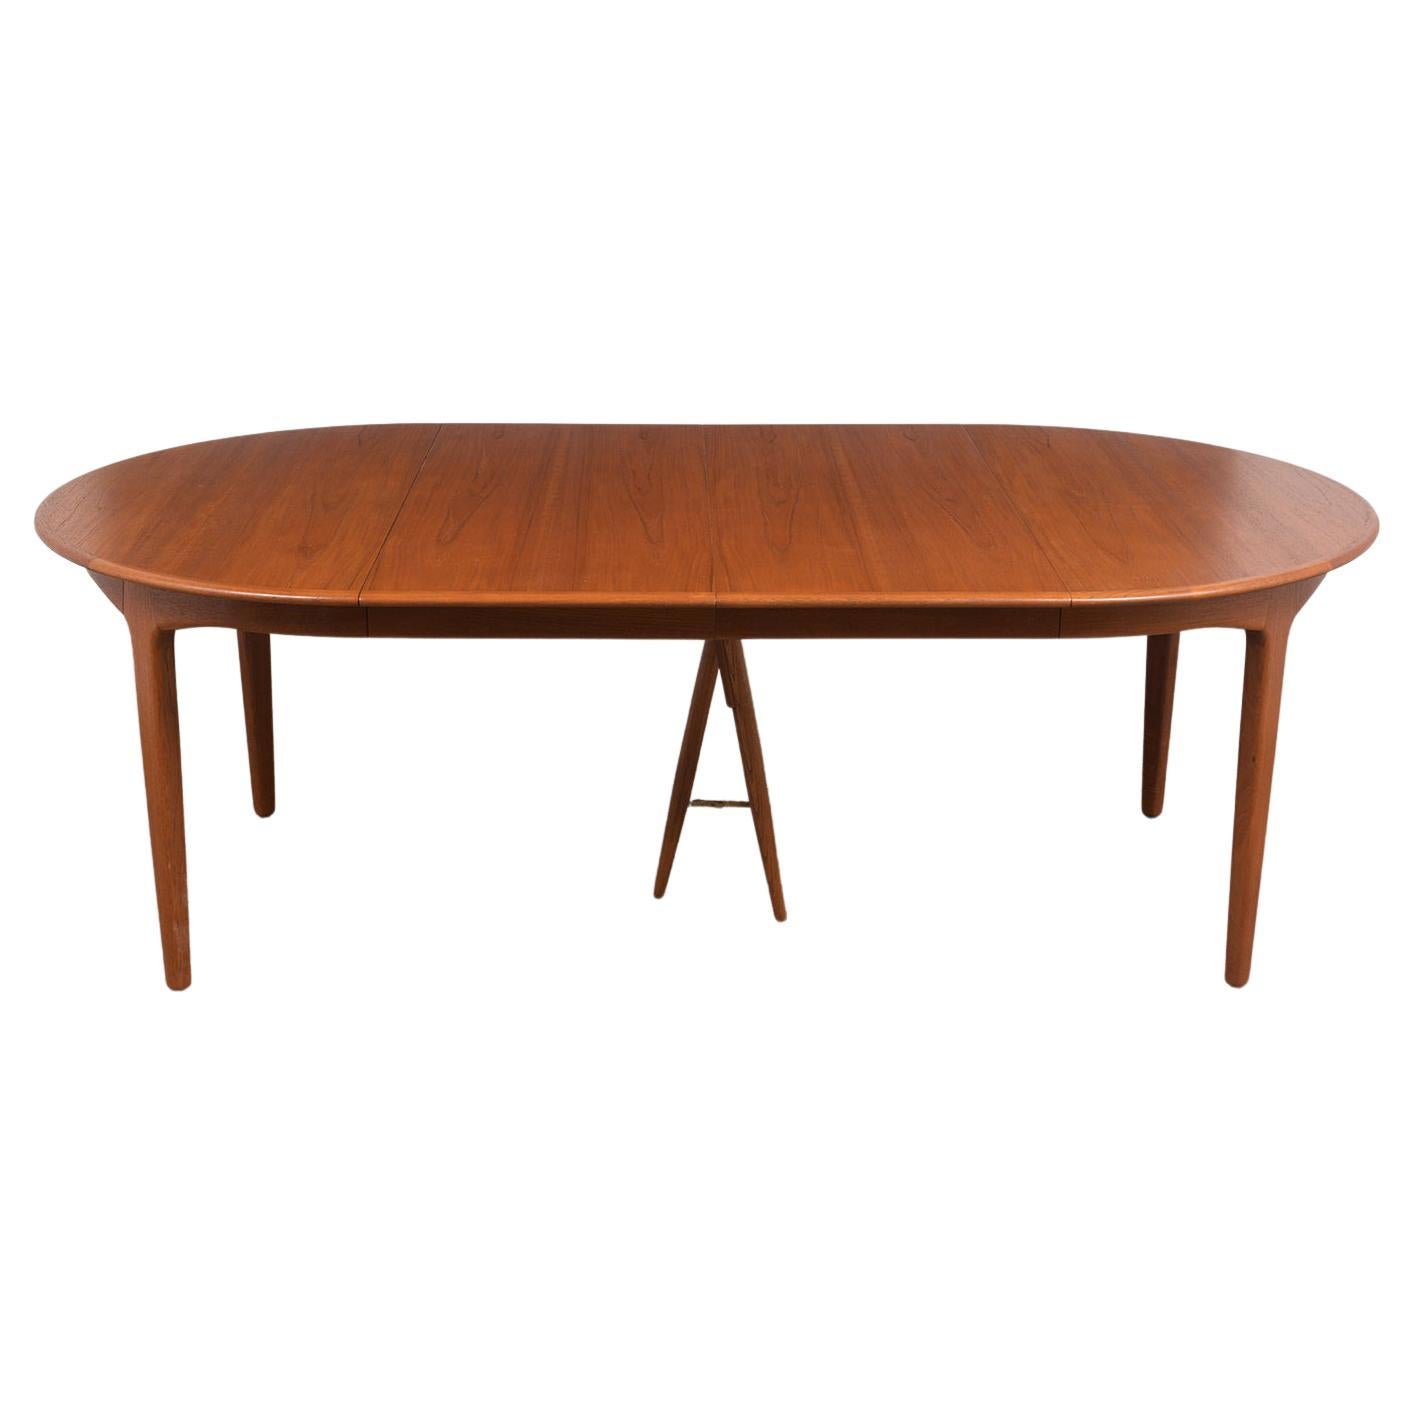 This large Henning Kjaernulf for Soro Stolefabrik Danish dining table is made out of teak wood with its original walnut-stained finish and has been restored by our team of craftsmen. This round table comes with three extra leaves that can be added/